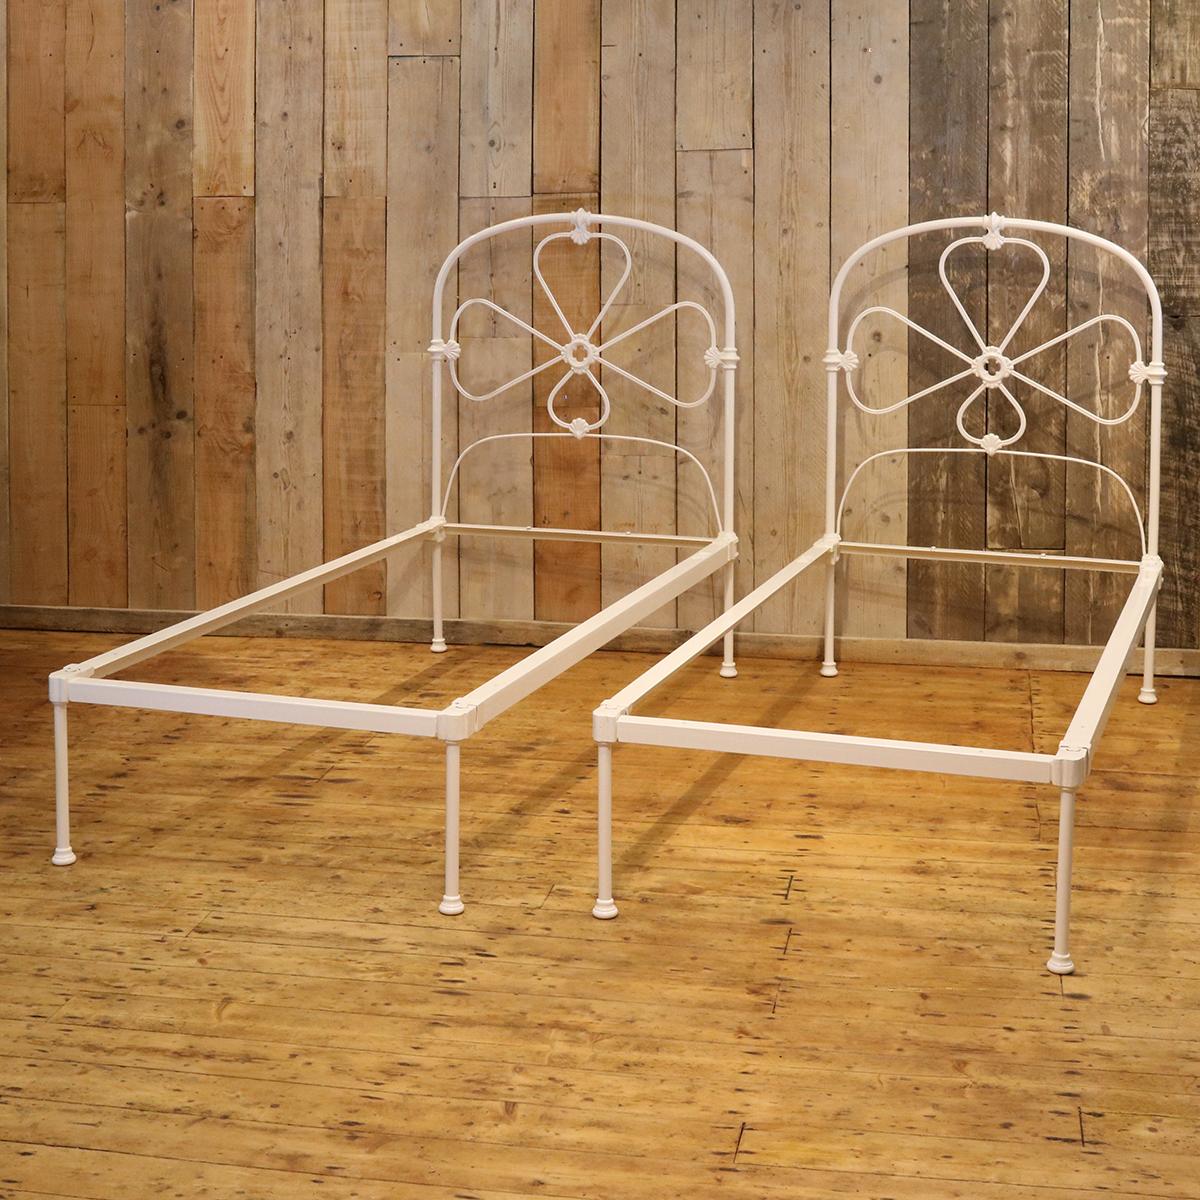 A matching pair of twin iron beds finished in white with hoop design and decorative castings.

These beds accept 3ft wide (36 inch or 90 cm) bases and mattresses.

The length can be 75 inches, 78 inches or more if required.

These beds can be